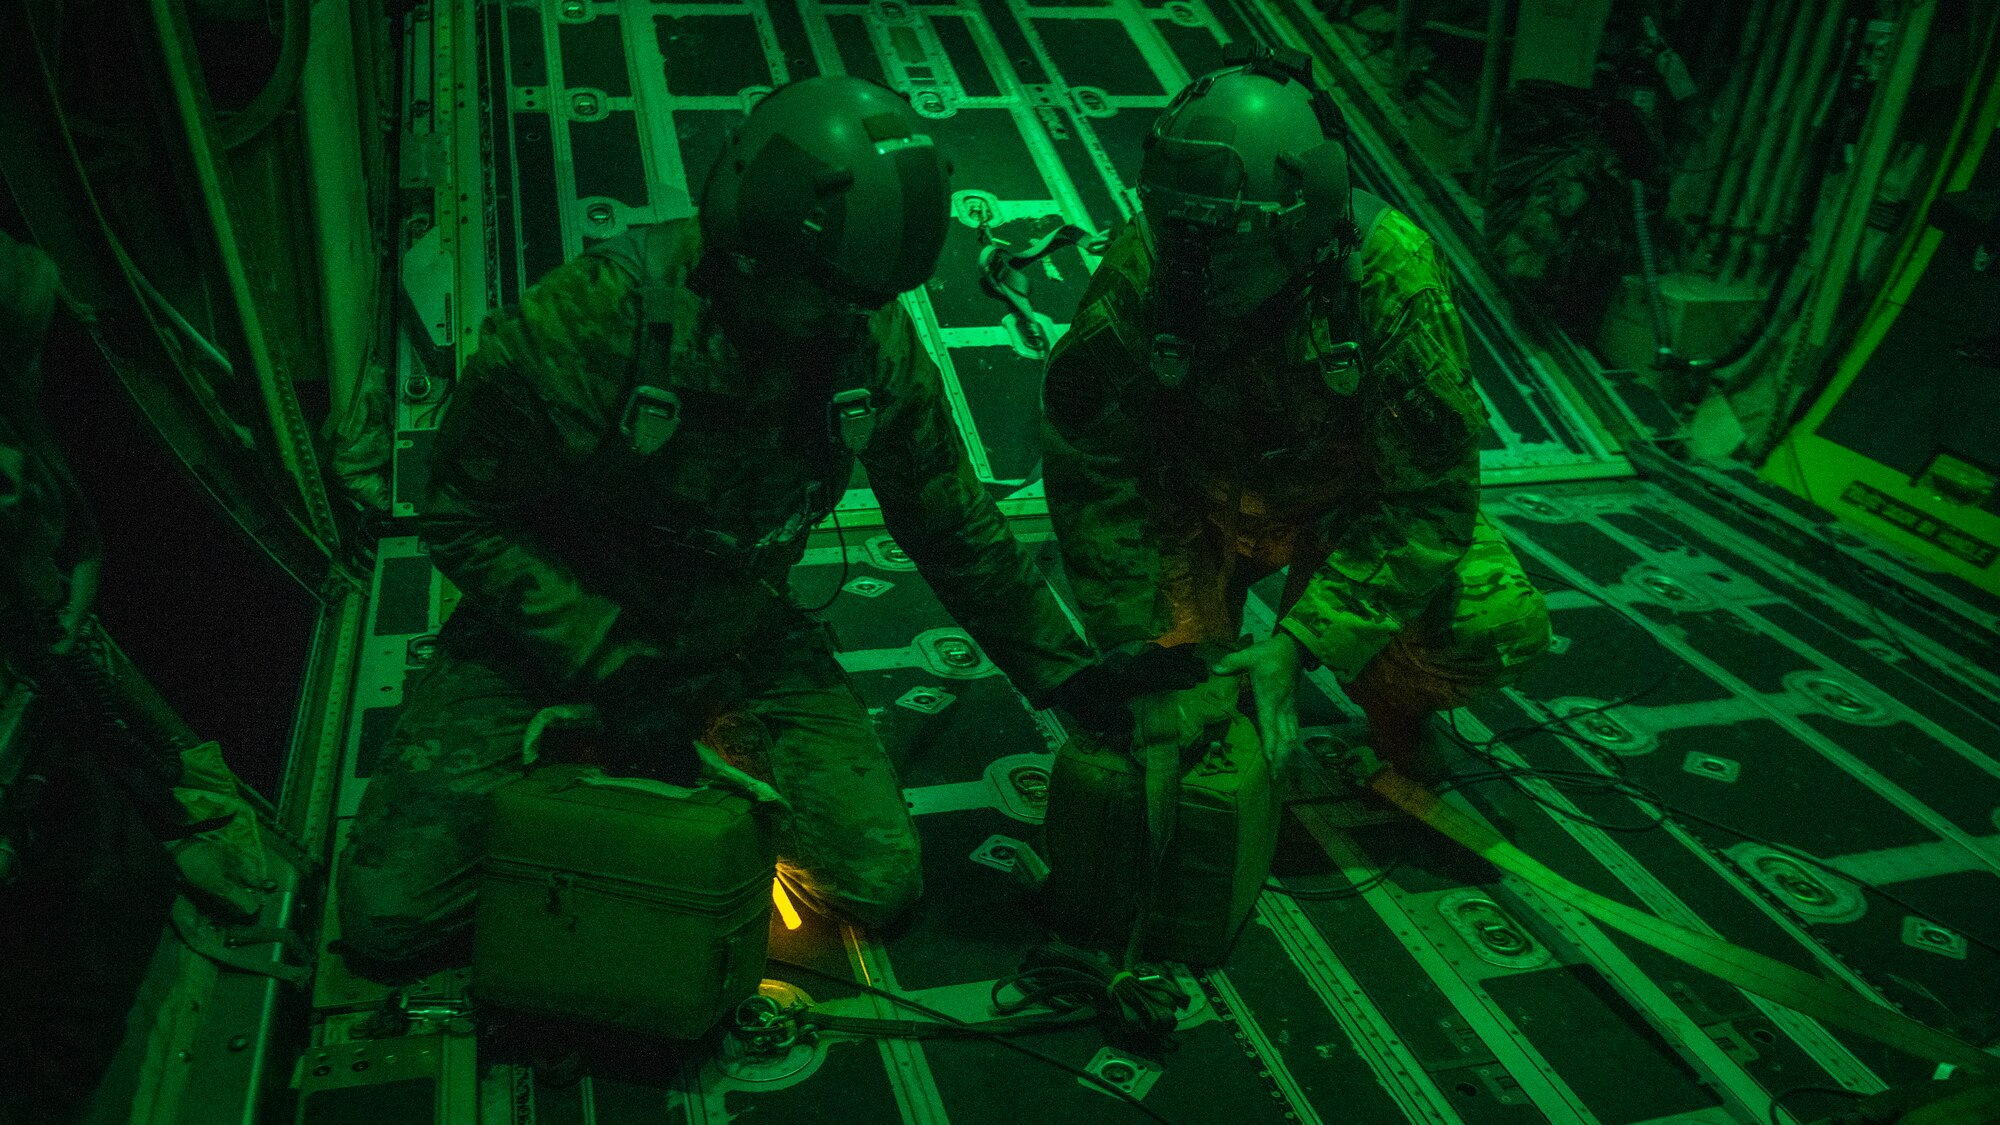 U.S. Air Force Tech. Sgt. John Richman, a 492nd Special Operations Training Group Detachment 2 loadmaster, left, and U.S. Air Force Lt. Col. William Smith, right, the Air Force Special Operations Command integration and operability chief, grab thermal blood transport boxes during Operation Blood Rain near Eglin Range, Florida, Aug. 5, 2021.